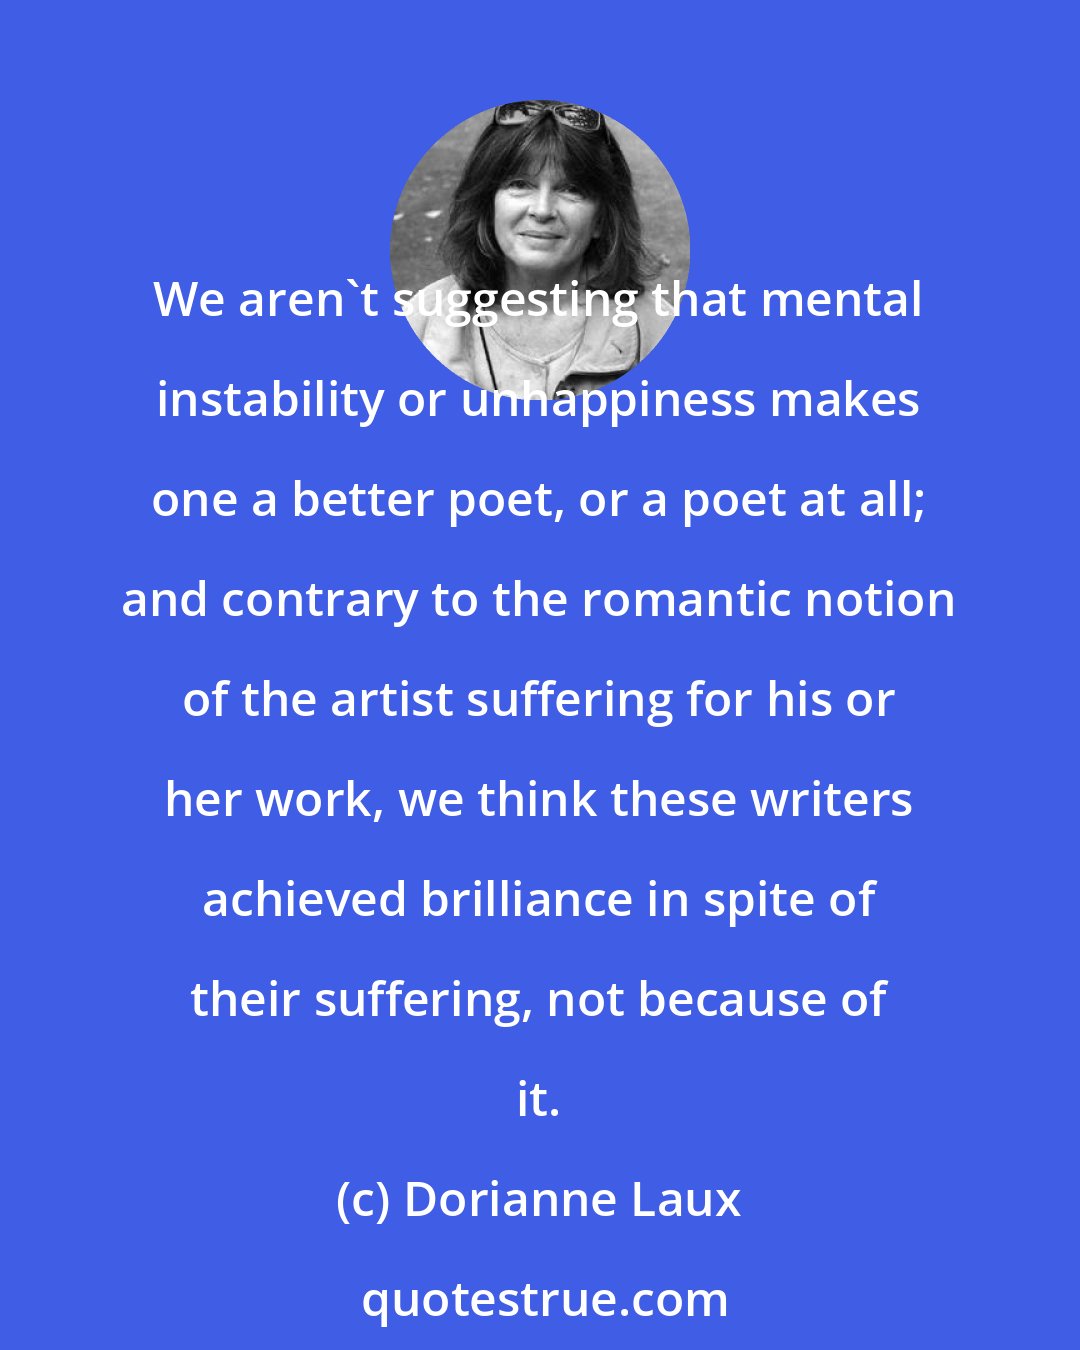 Dorianne Laux: We aren't suggesting that mental instability or unhappiness makes one a better poet, or a poet at all; and contrary to the romantic notion of the artist suffering for his or her work, we think these writers achieved brilliance in spite of their suffering, not because of it.